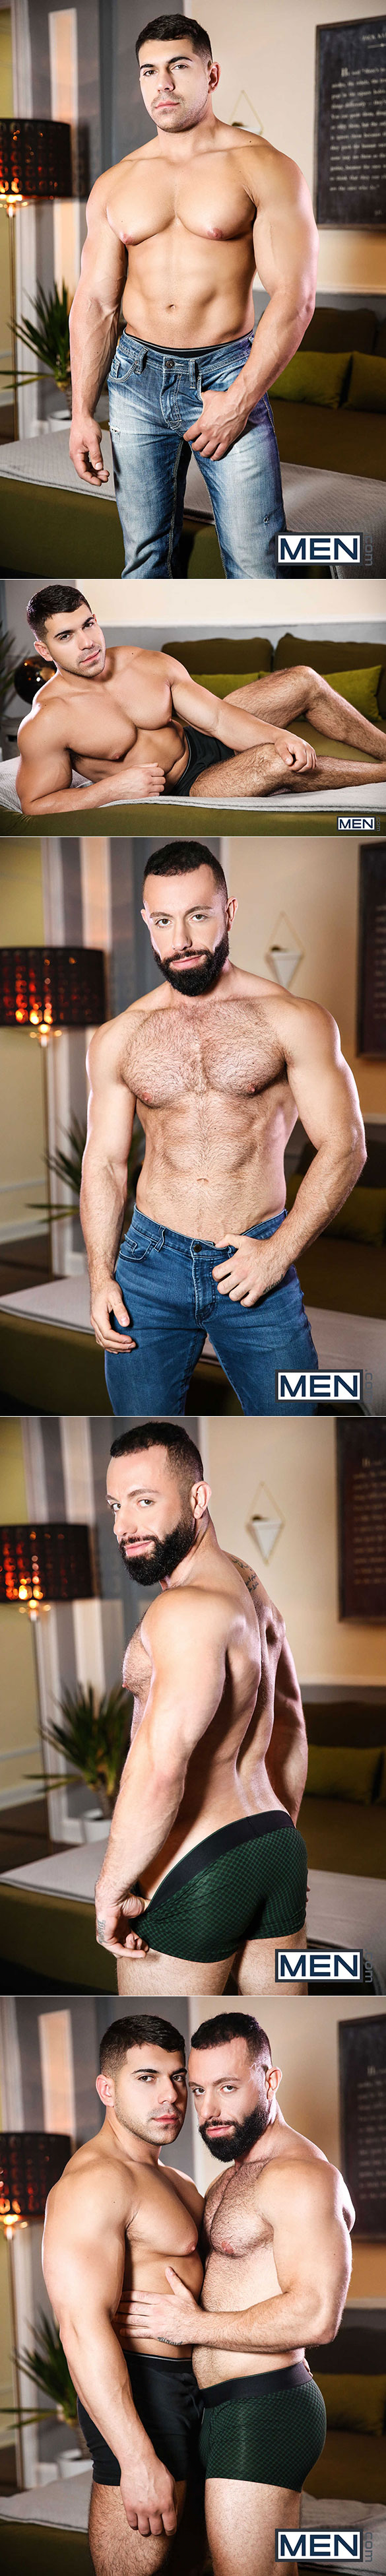 Men.com: Damien Stone tops Eddy CeeTee in "Look What I Can Do, Part 2"